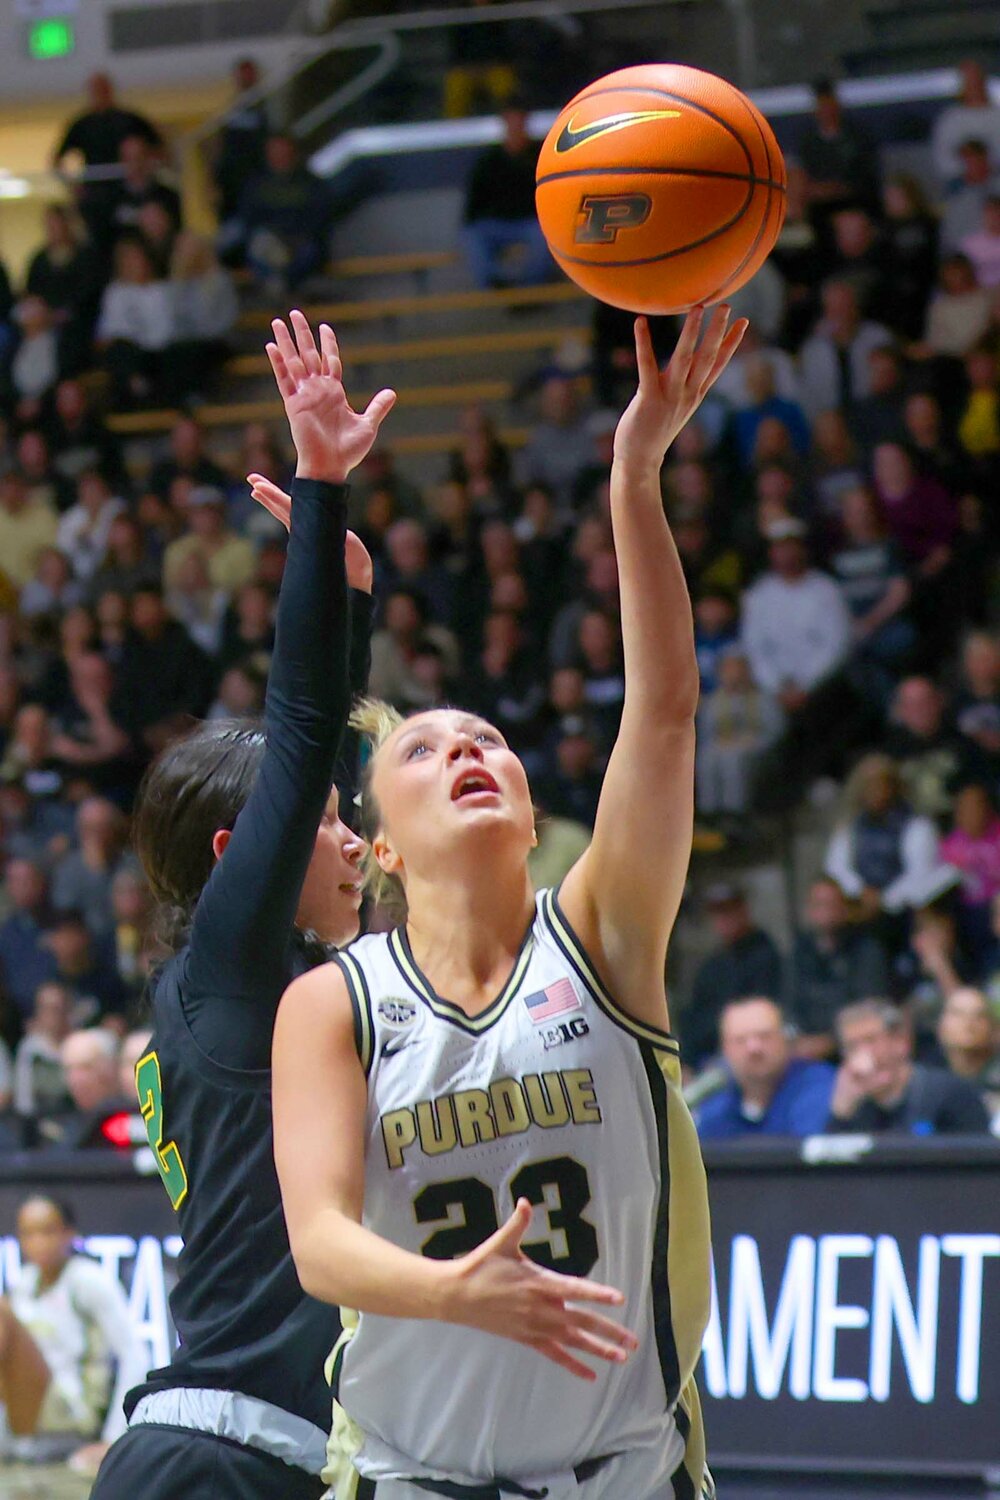 Abbey Ellis of Purdue - scooping a lay-up against Vermont